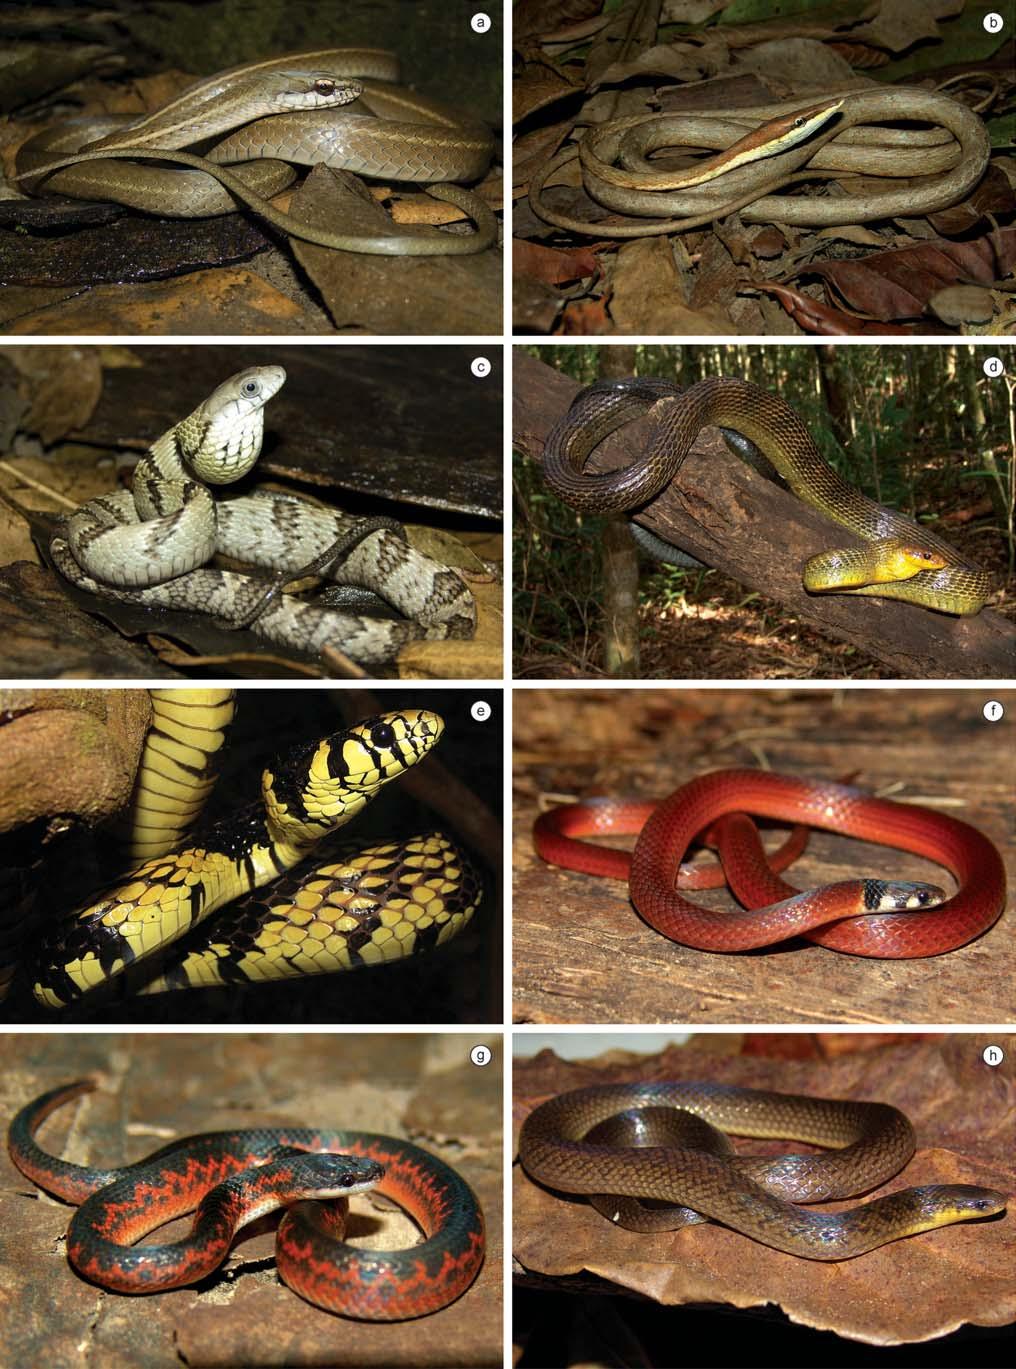 Biota Neotrop., vol. 10, no. 3 249 Amphibians and reptiles from a highly diverse area of the Caatinga domain Figure 15. Reptile species found in the region of CPI.